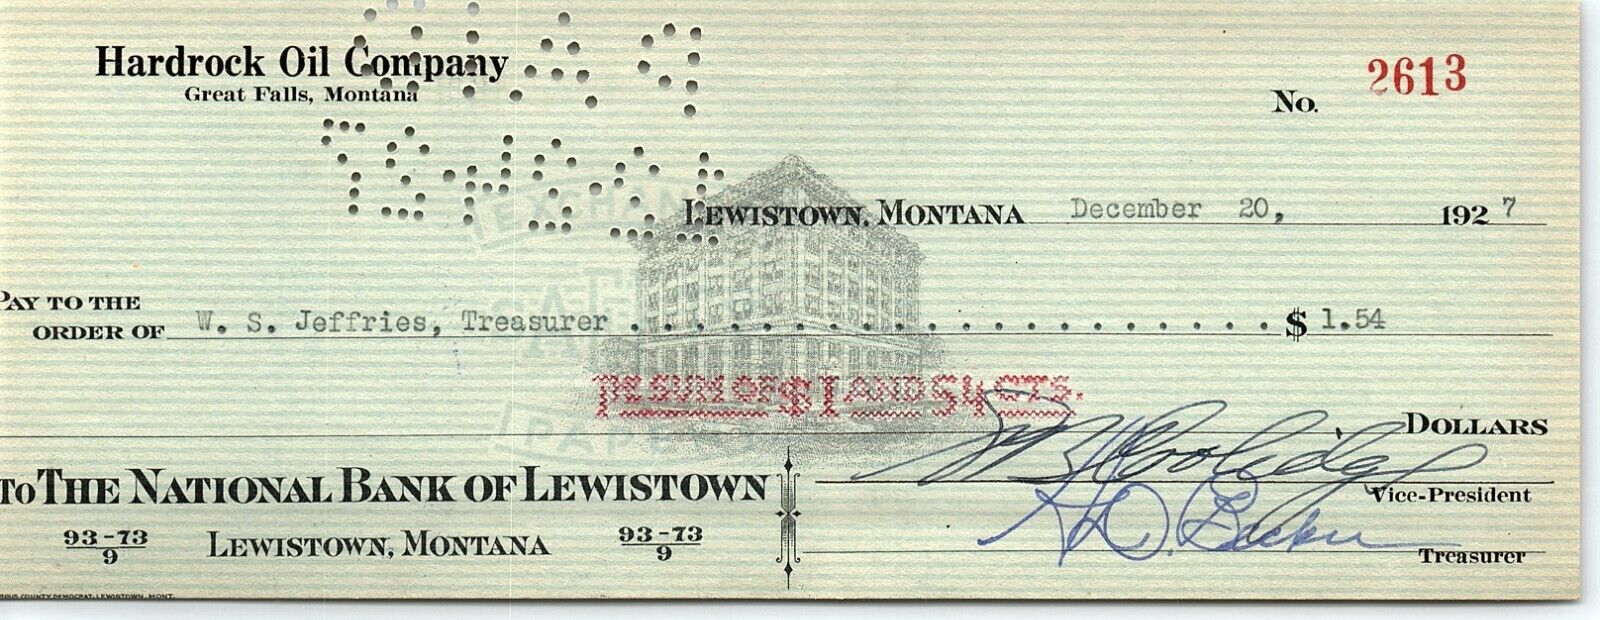 1927 GREAT FALLS MONTANA HARDROCK OIL CO NATIONAL BANK OF LEWISTOWN CHECK Z1610